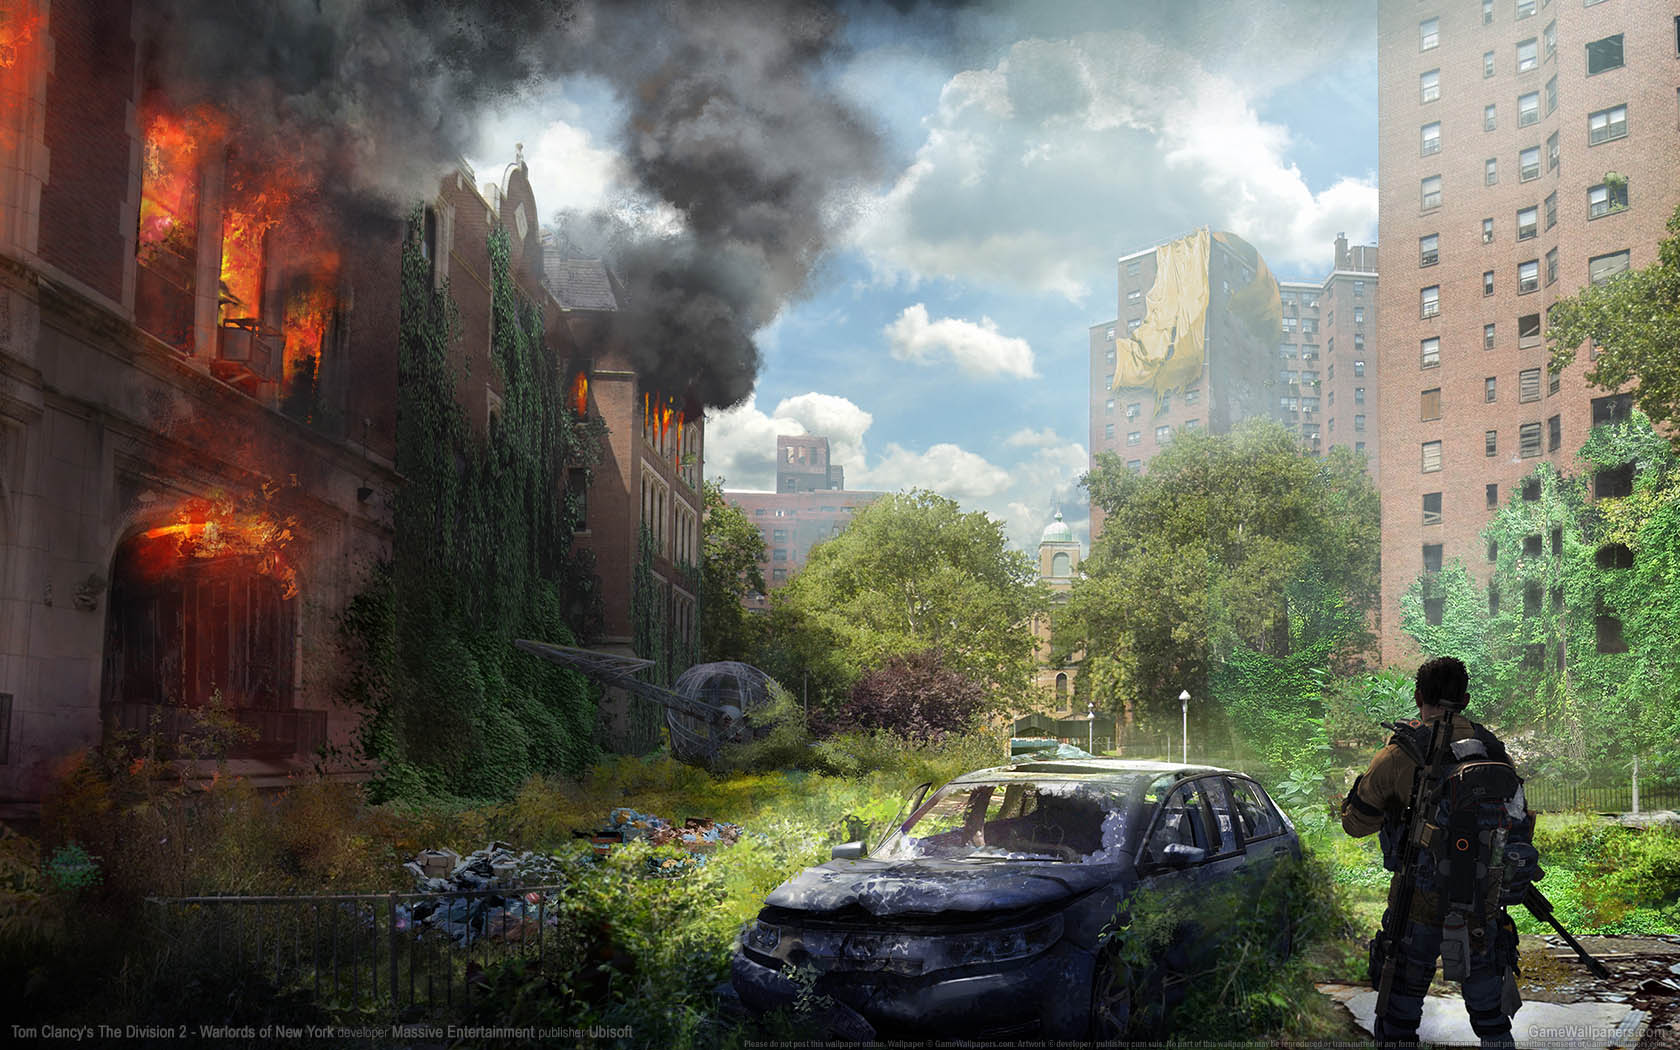 Tom Clancy's The Division 2 - Warlords of New York wallpaper 03 1680x1050